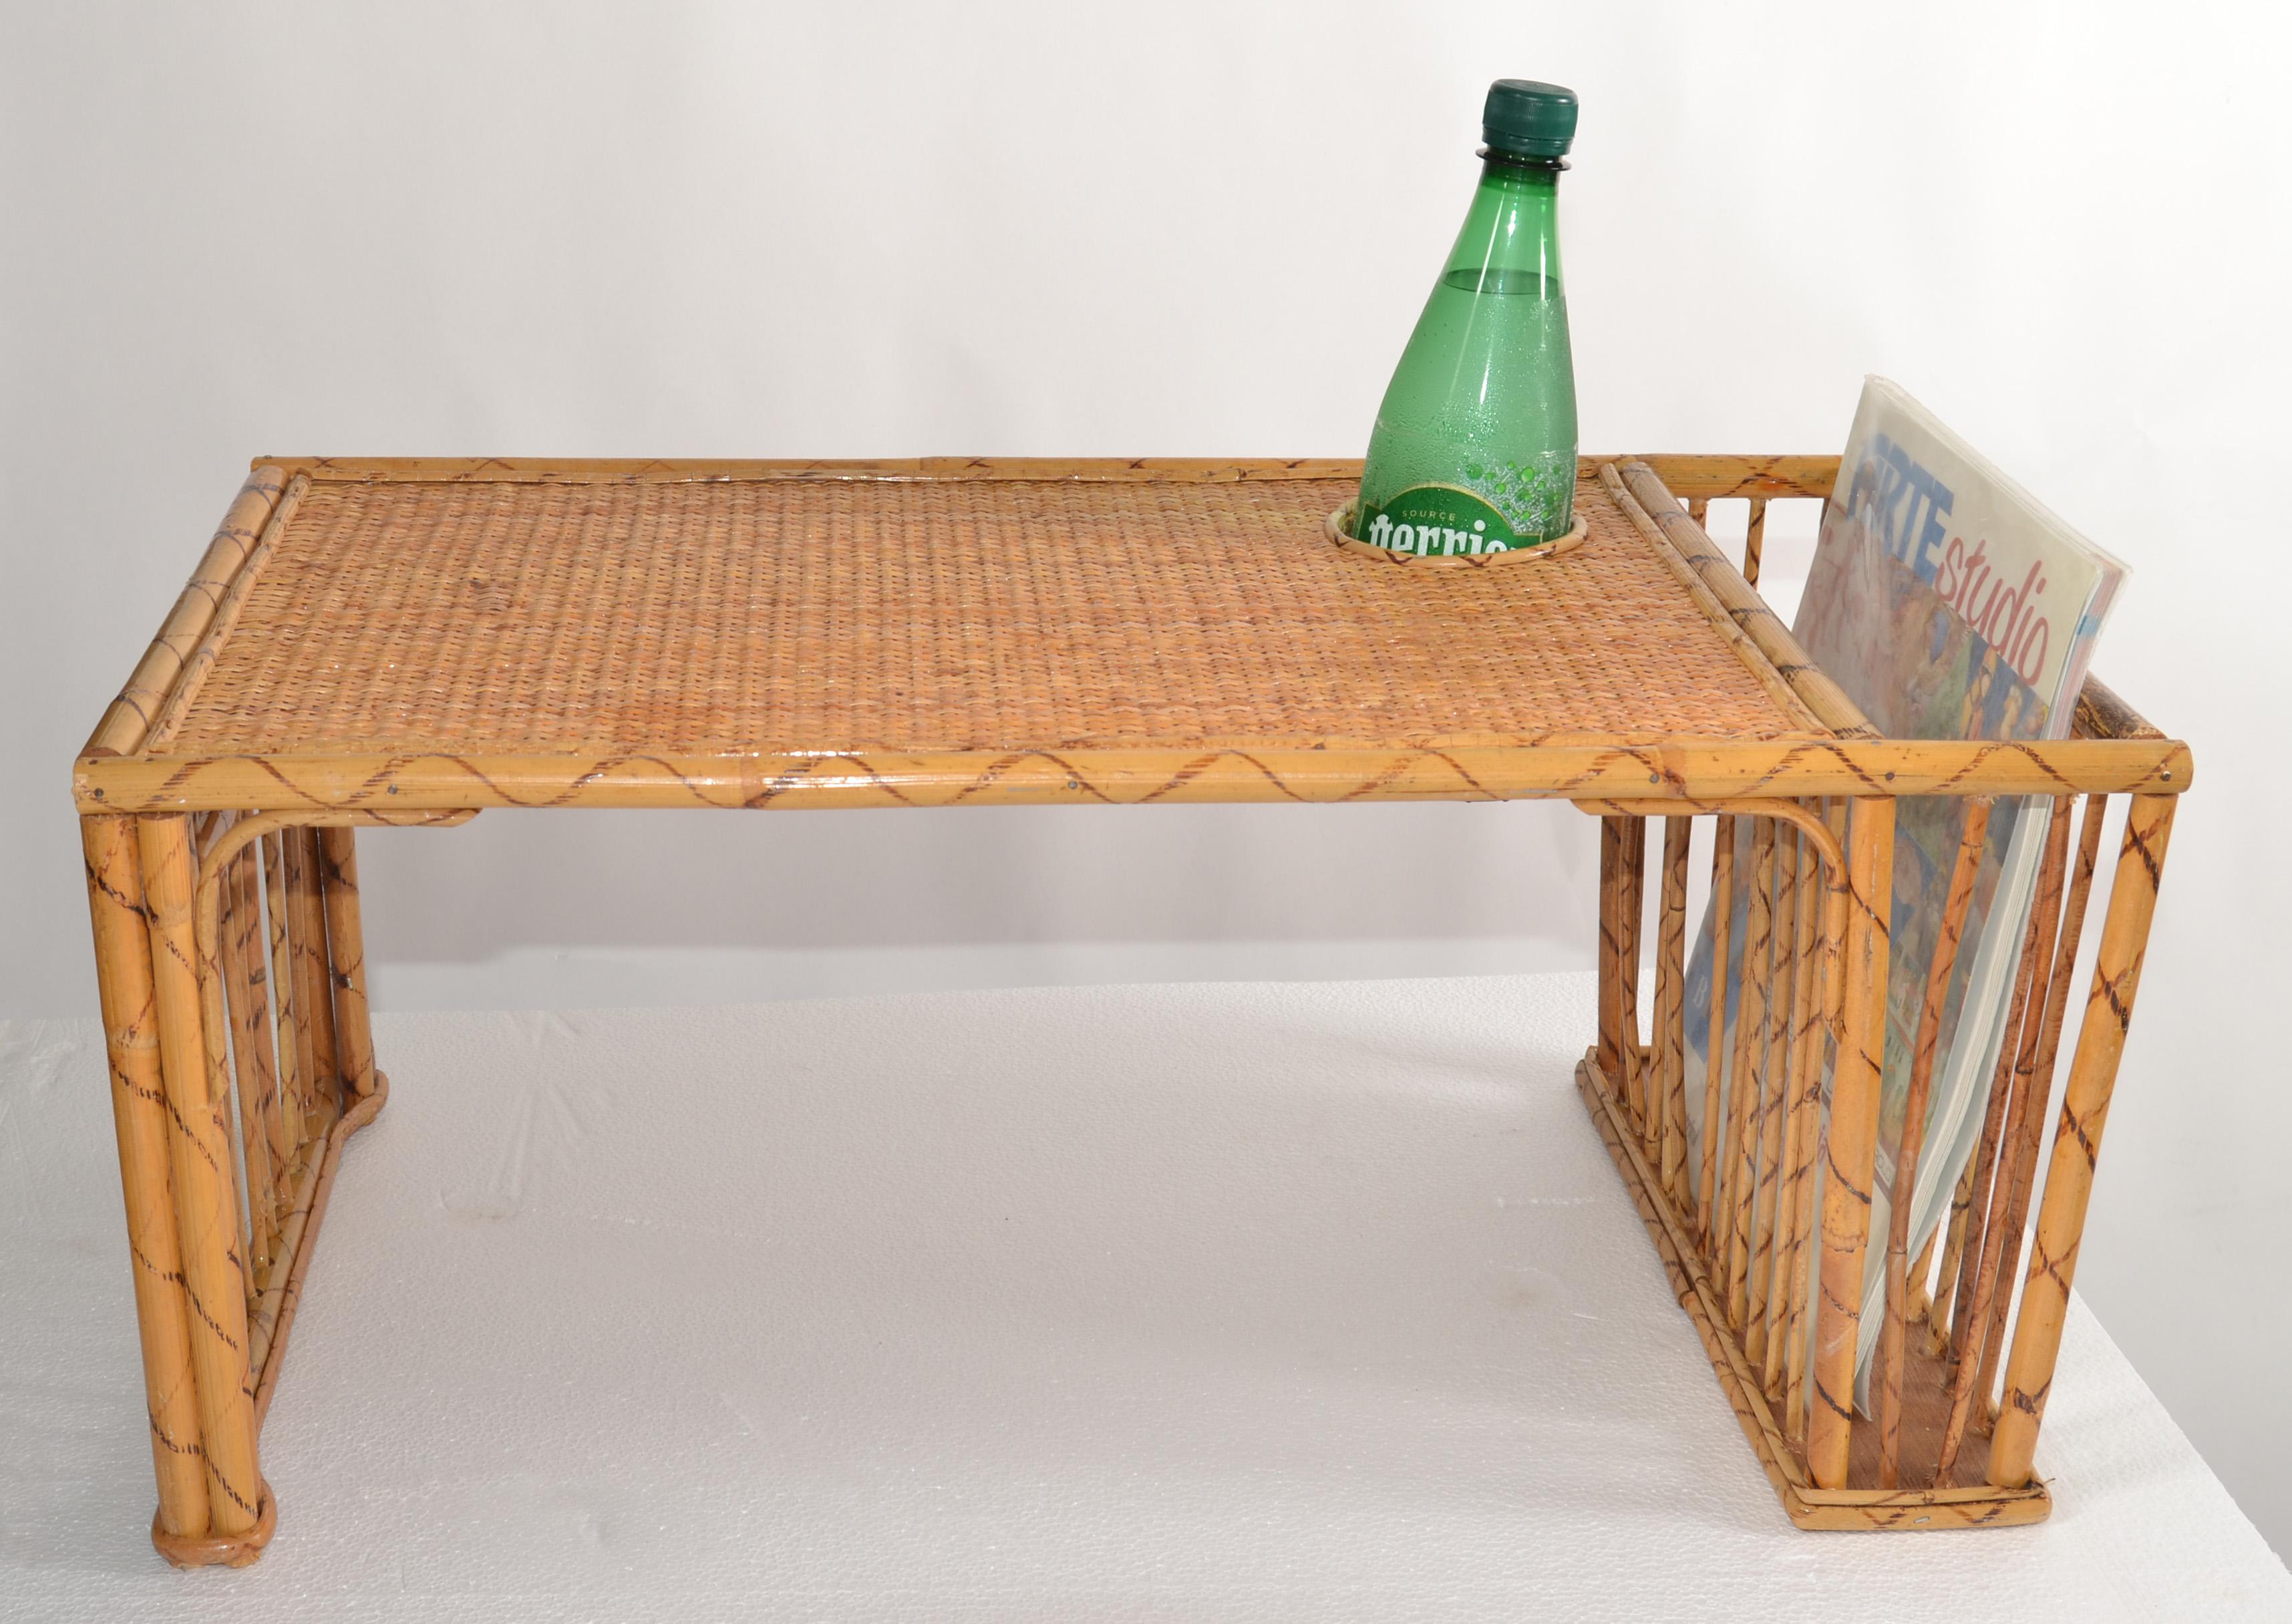 Bohemian Handwoven Reed Caning Bamboo Breakfast Bed Tray Table Cup Book Holder In Good Condition For Sale In Miami, FL